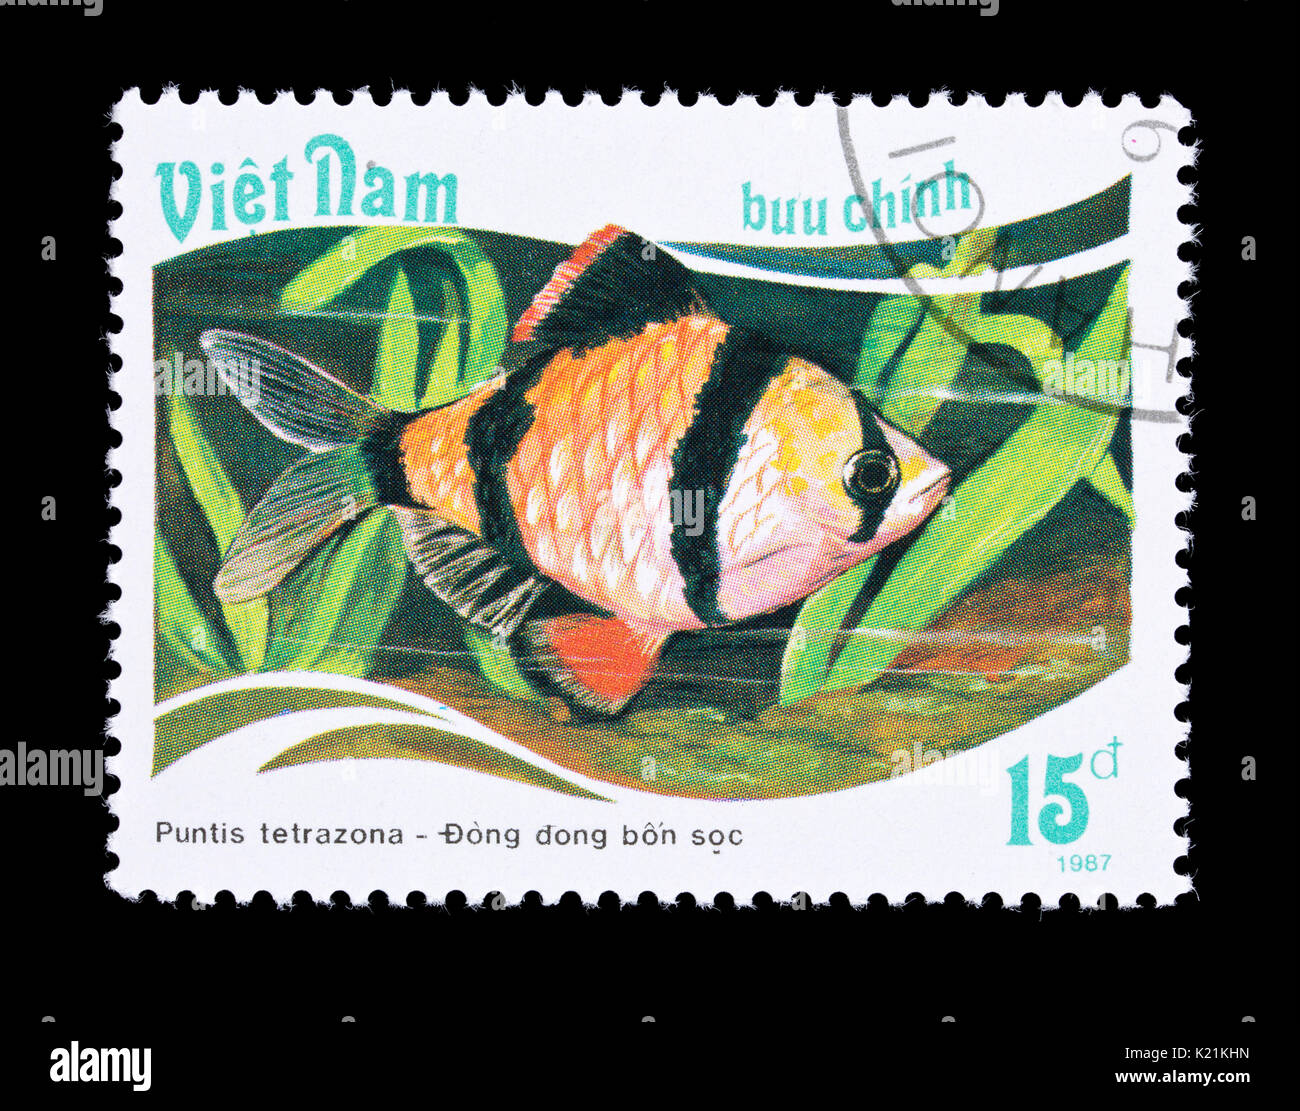 Postage stamp from Vietnam depicting a tiger barb (Puntis tetrazona) Stock Photo